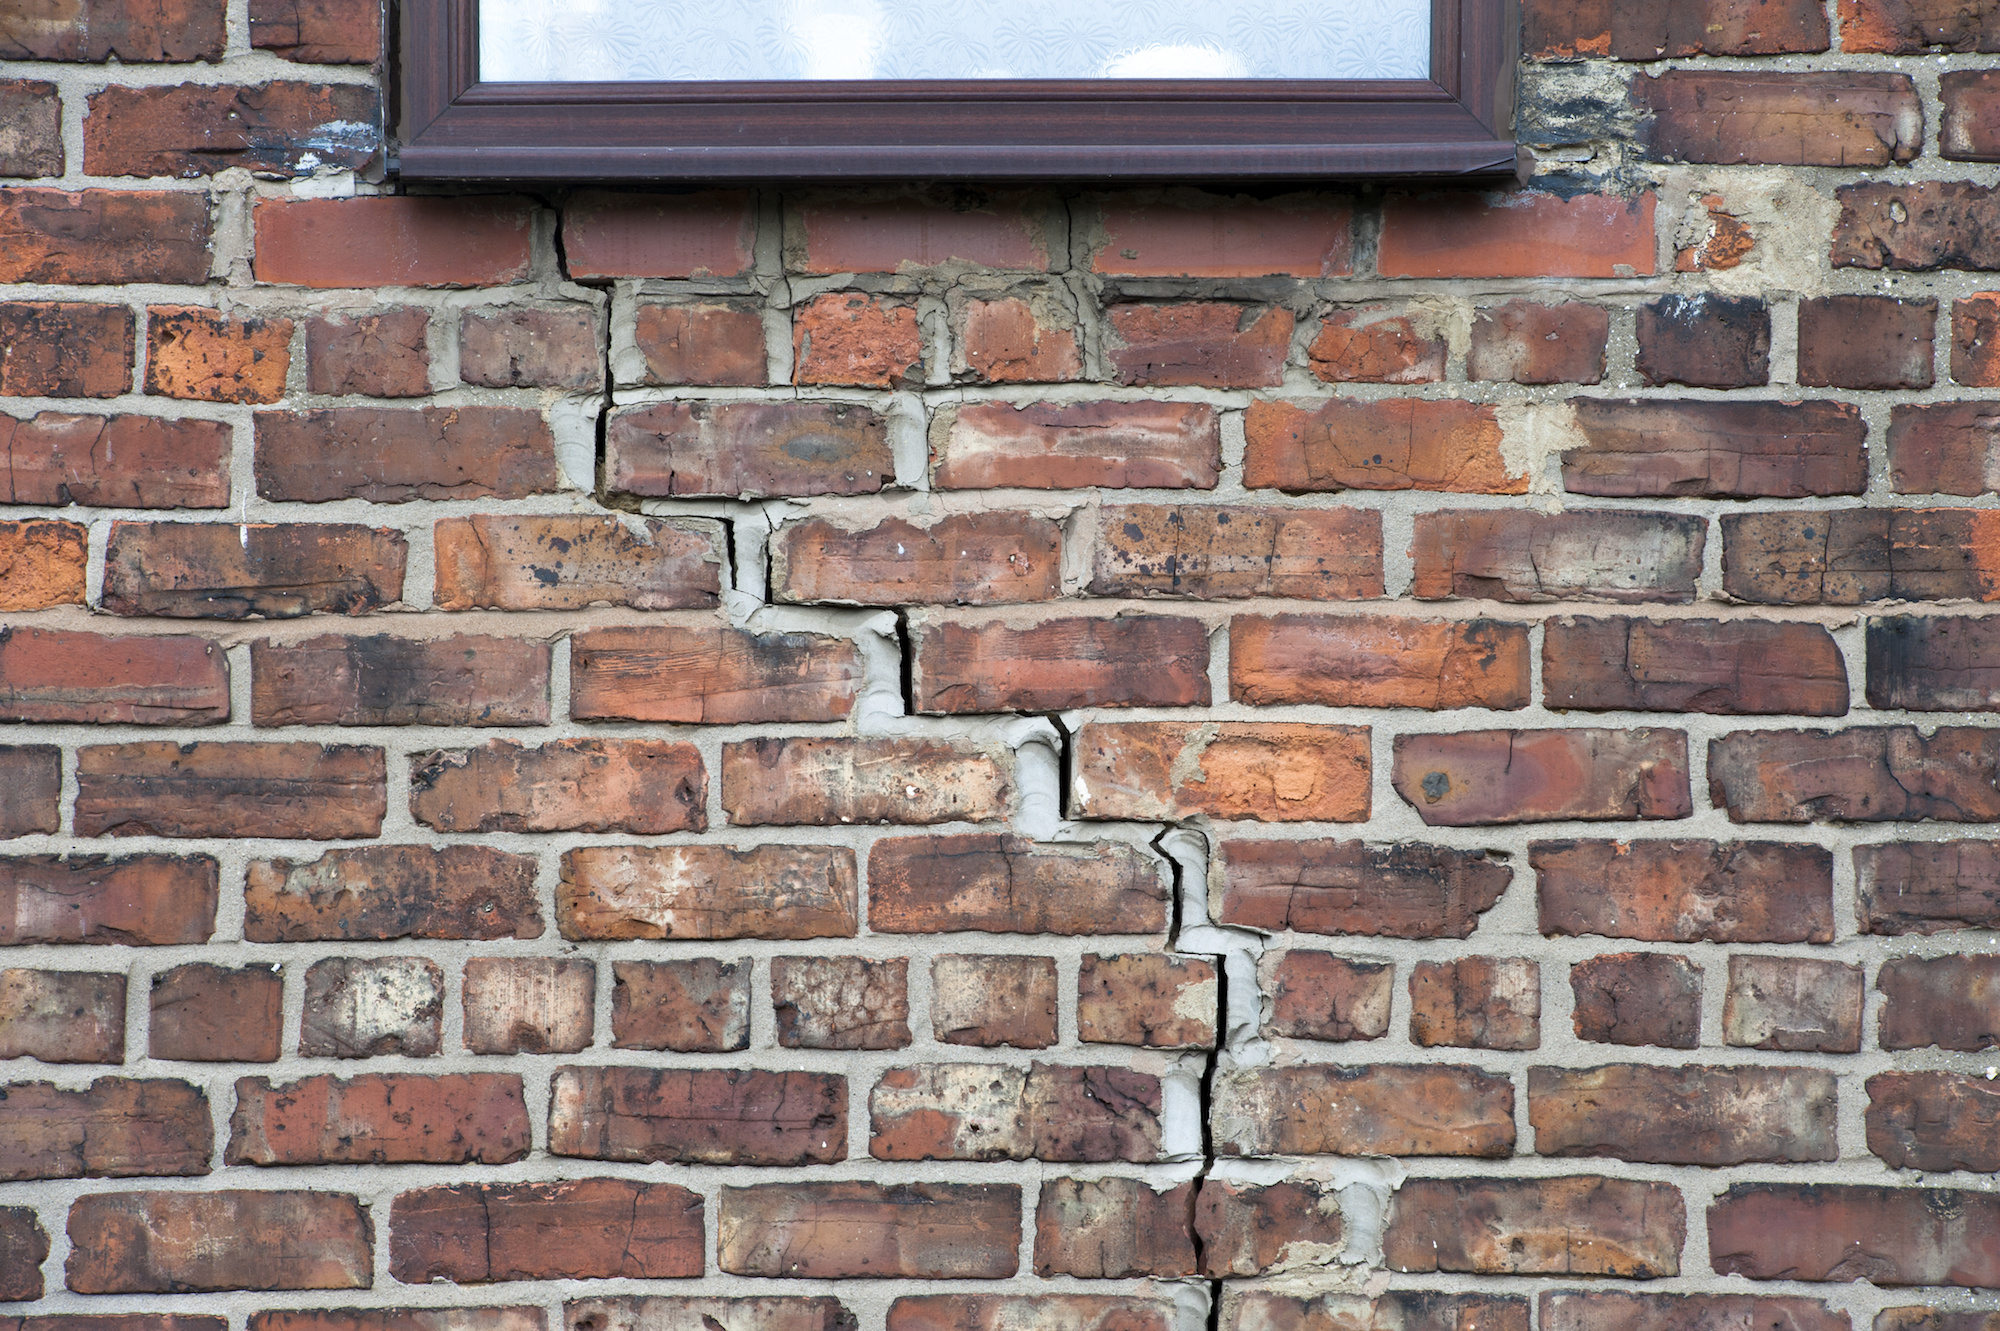 Step cracking damage to brickwork in a wall beneath a window as a result of subsidence.